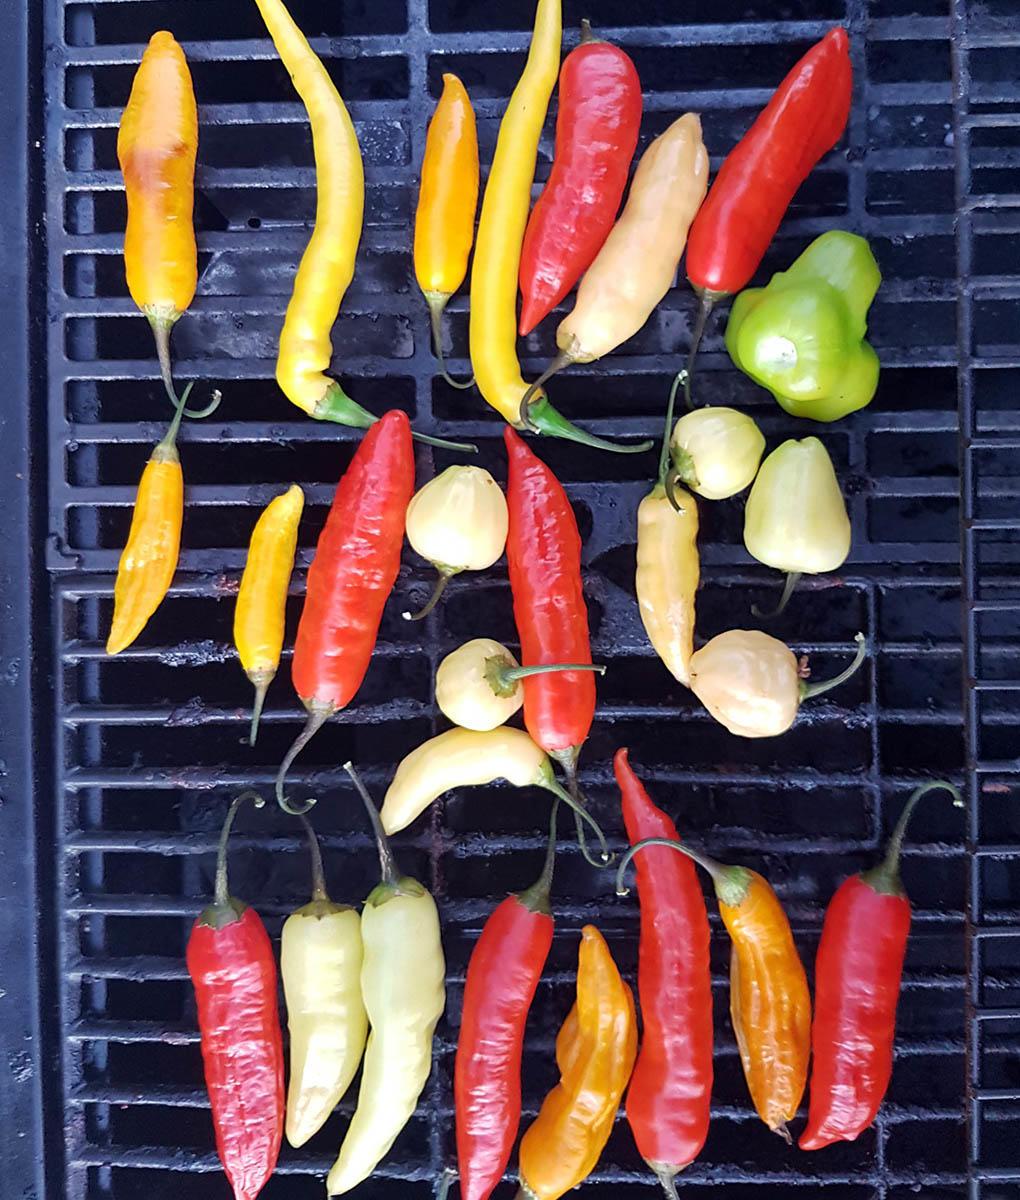 Several long peppers on a grill in colors of red, white, orange and green